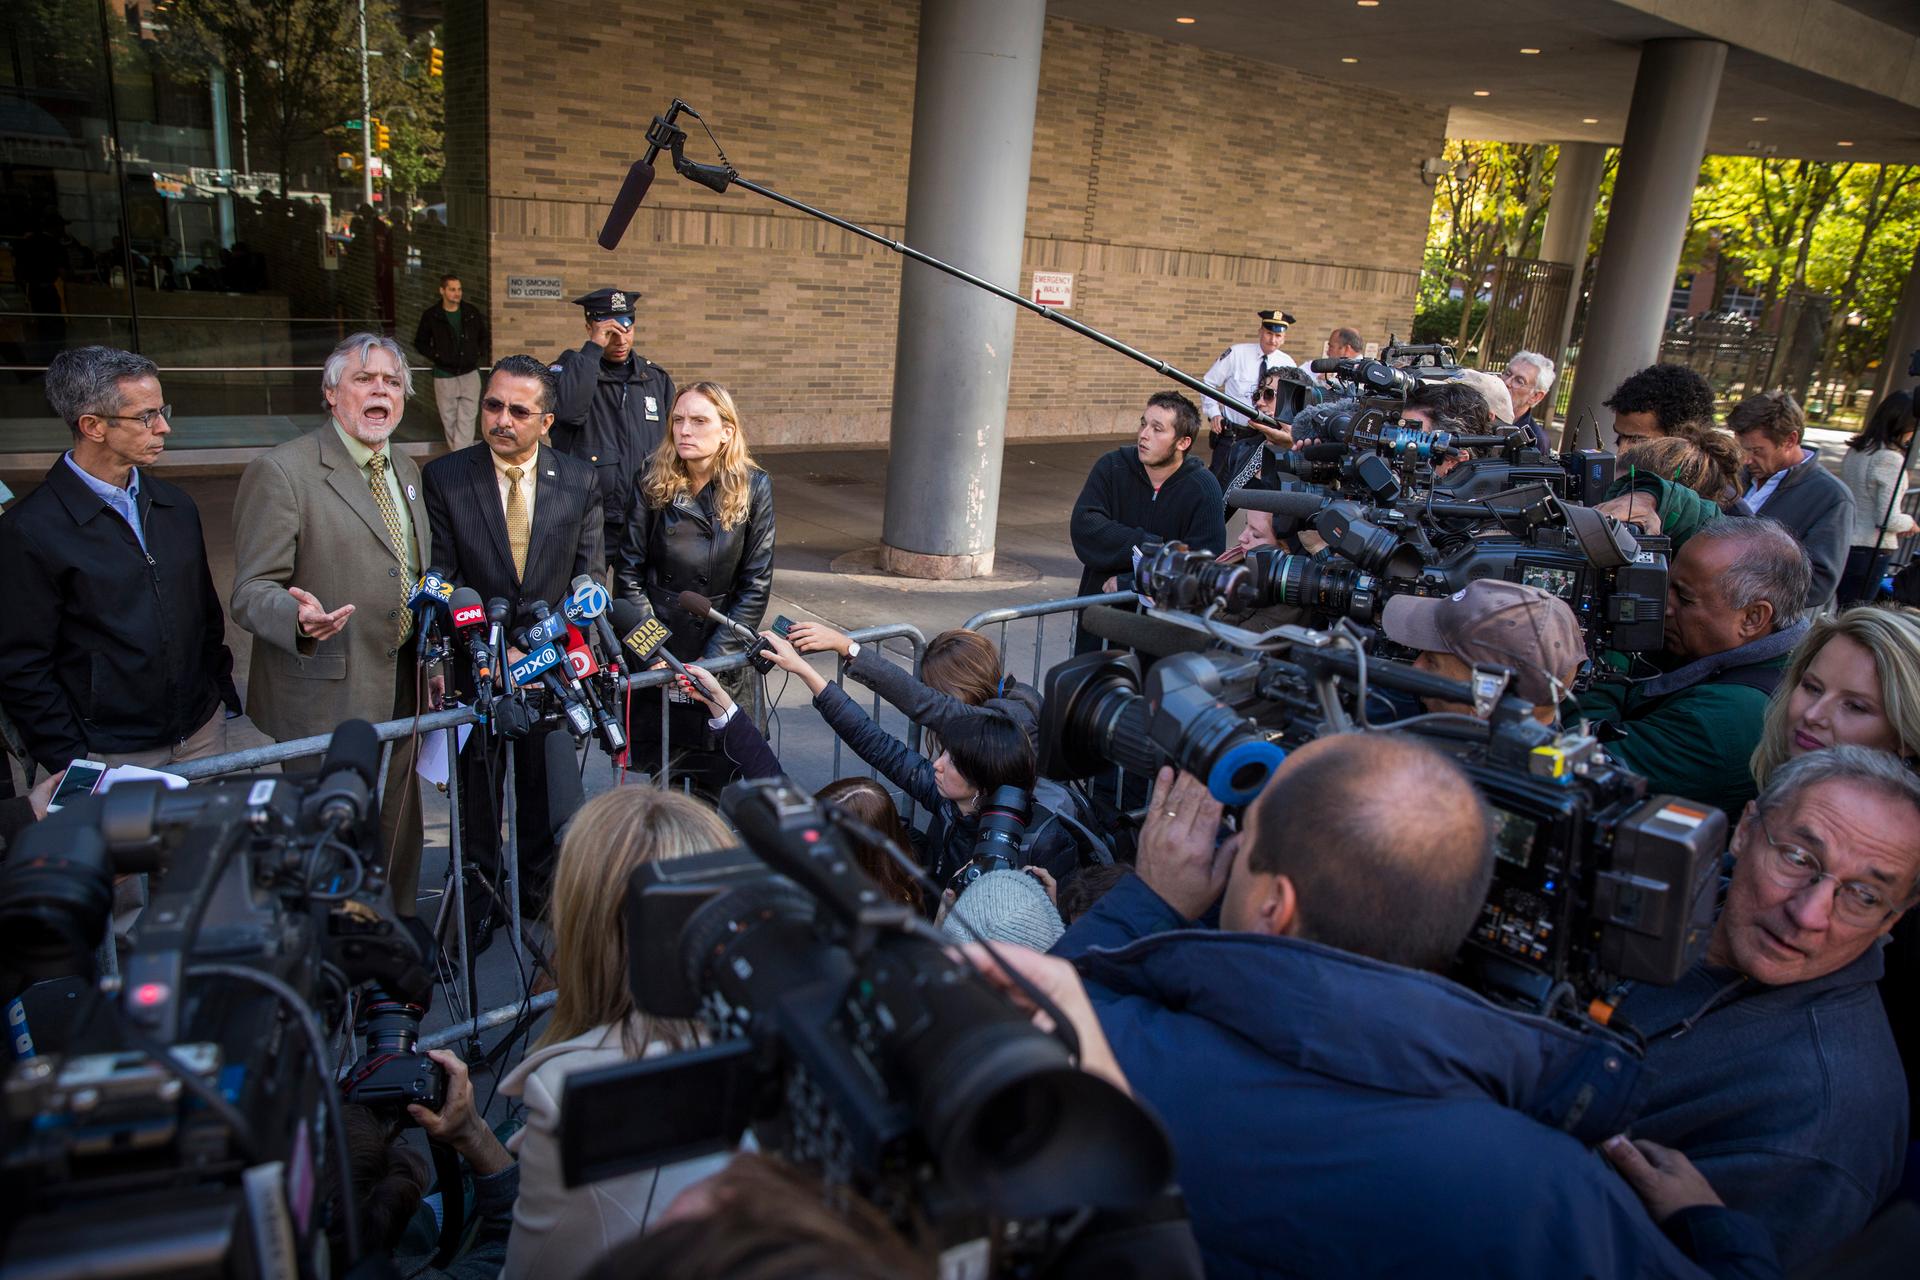 Housing Works CEO Charles King, second from left, speaks out against the current quarantine rules put into effect in New York and New Jersey following Ebola fears in the region outside of Bellevue Hospital in New York on October 27, 2014.